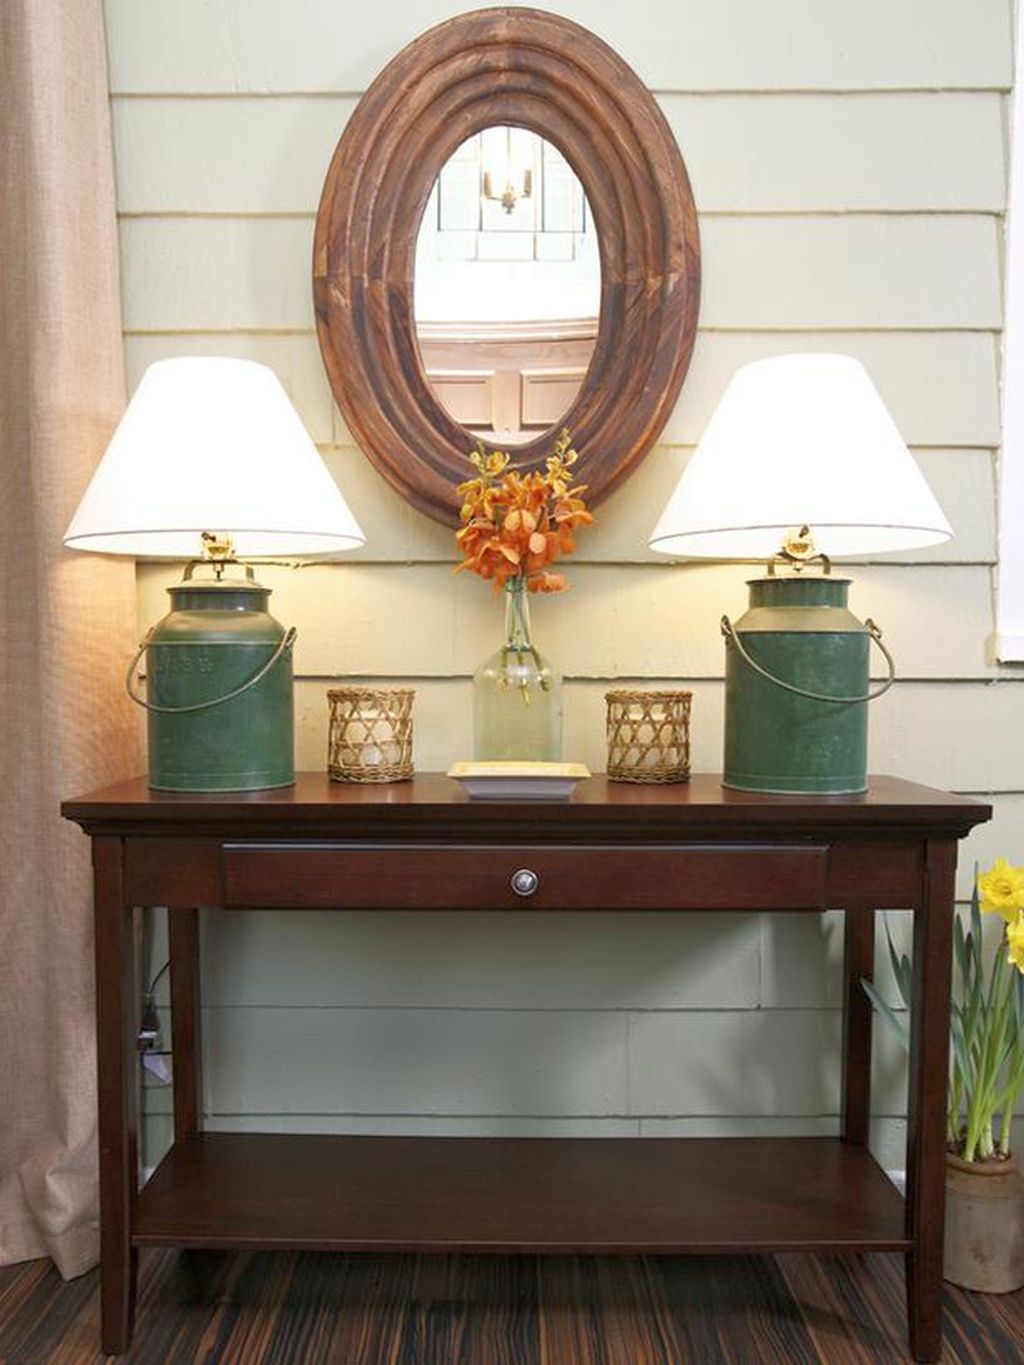 Rustic style small entry table ideas with oval mirror